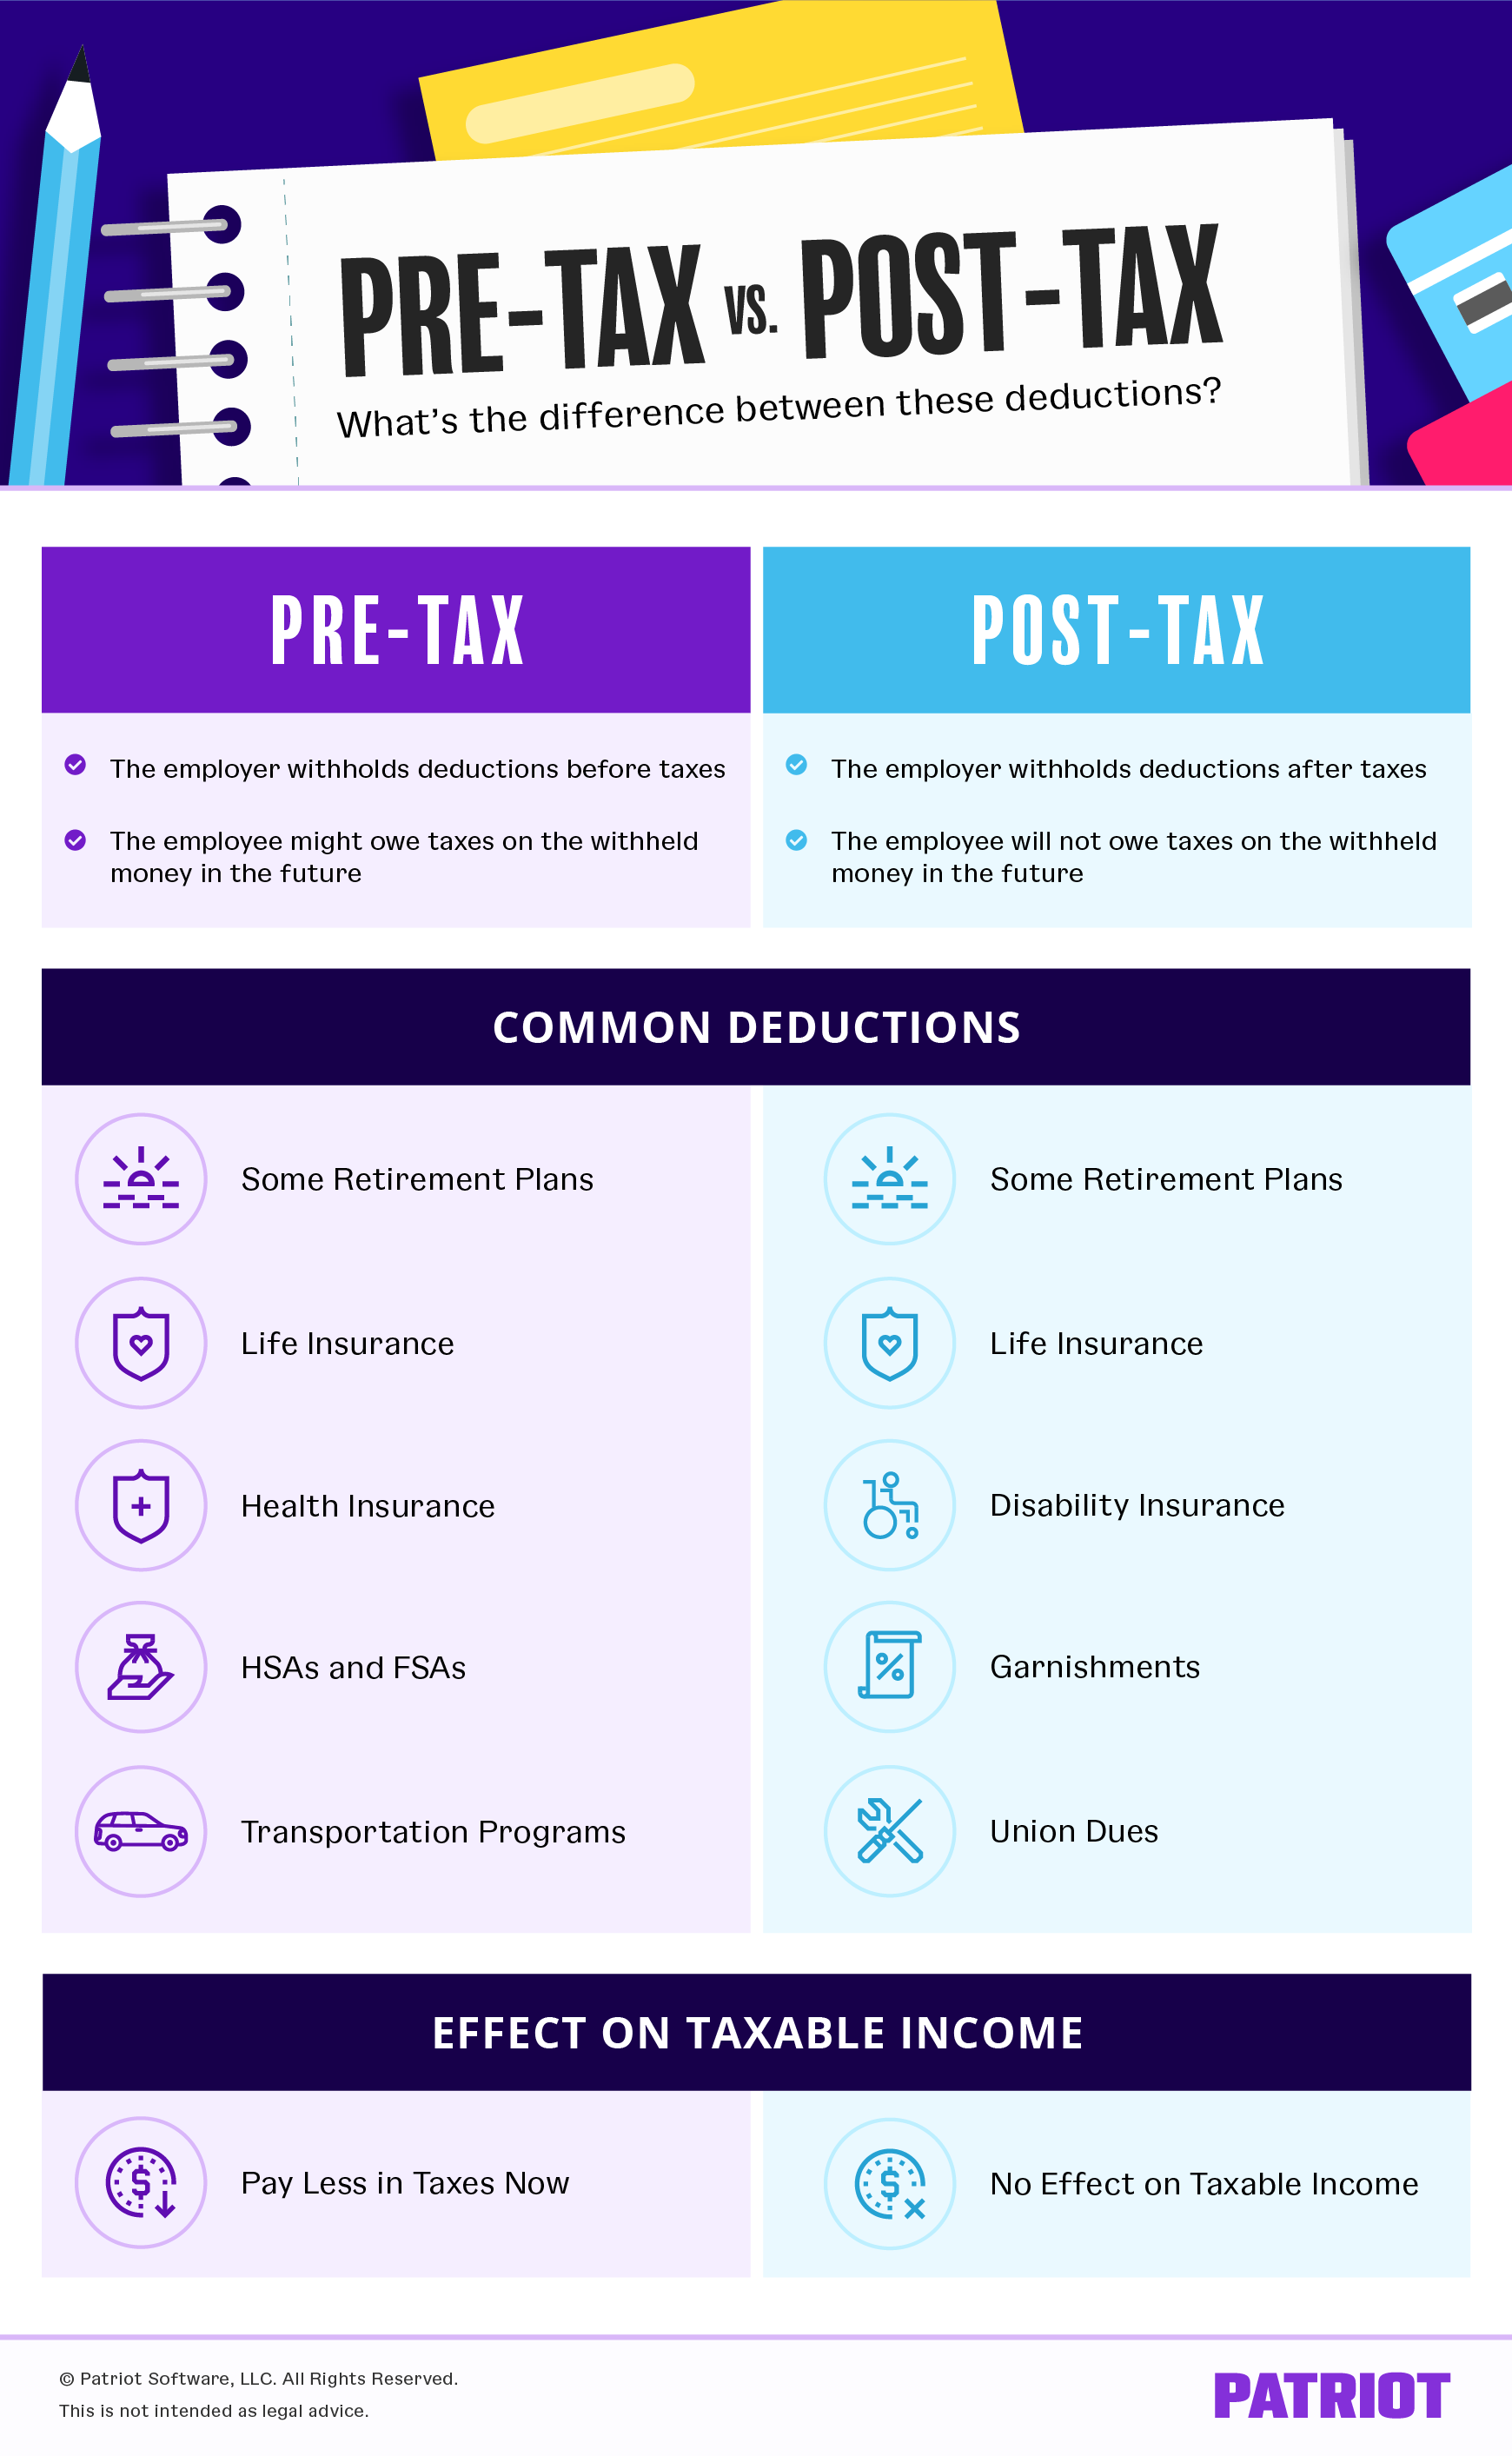 revised-tax-rebate-under-section-87a-fy-2019-2020-explained